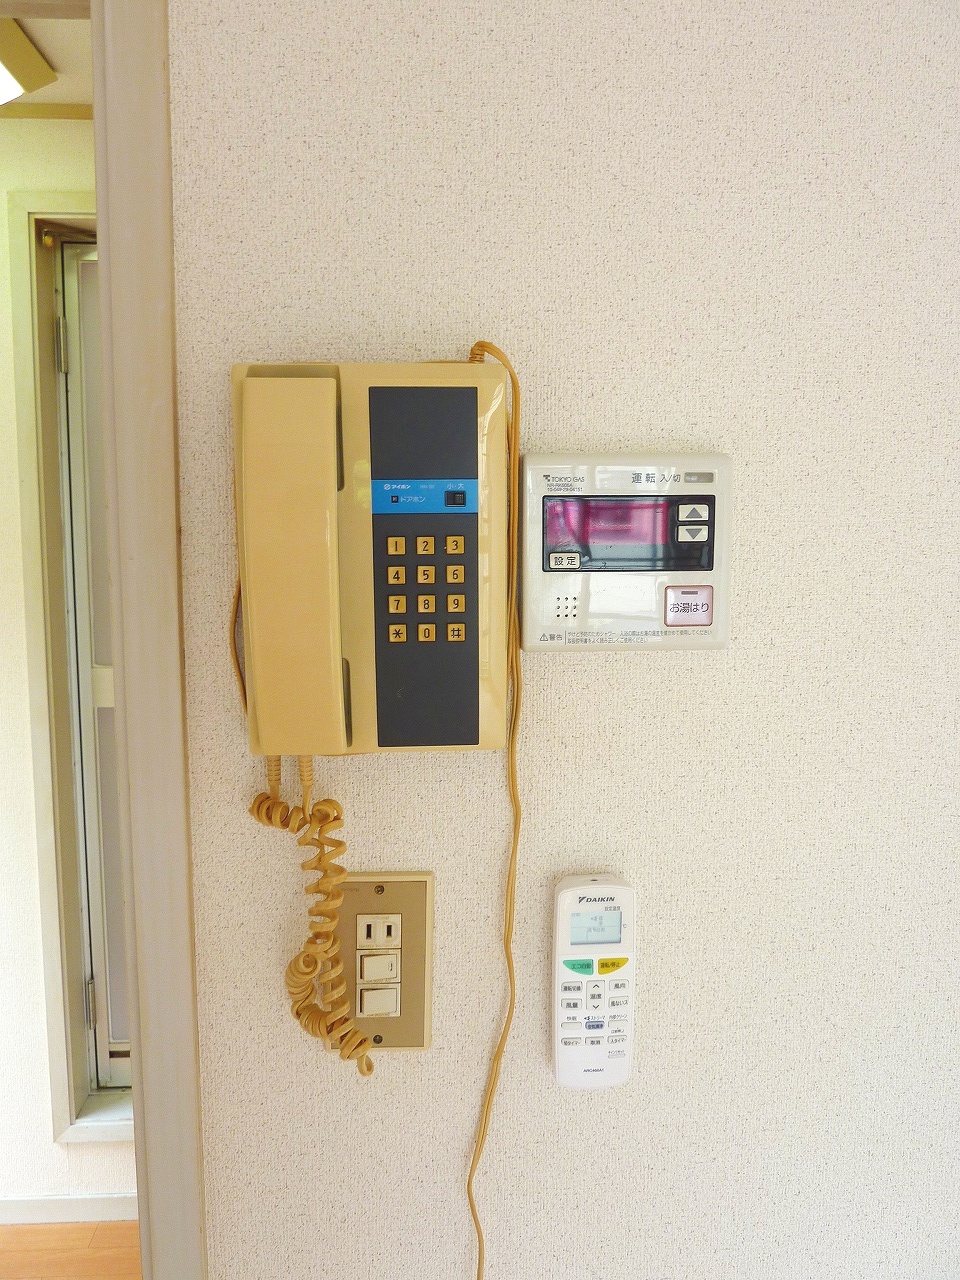 Security. You Yes and intercom installation